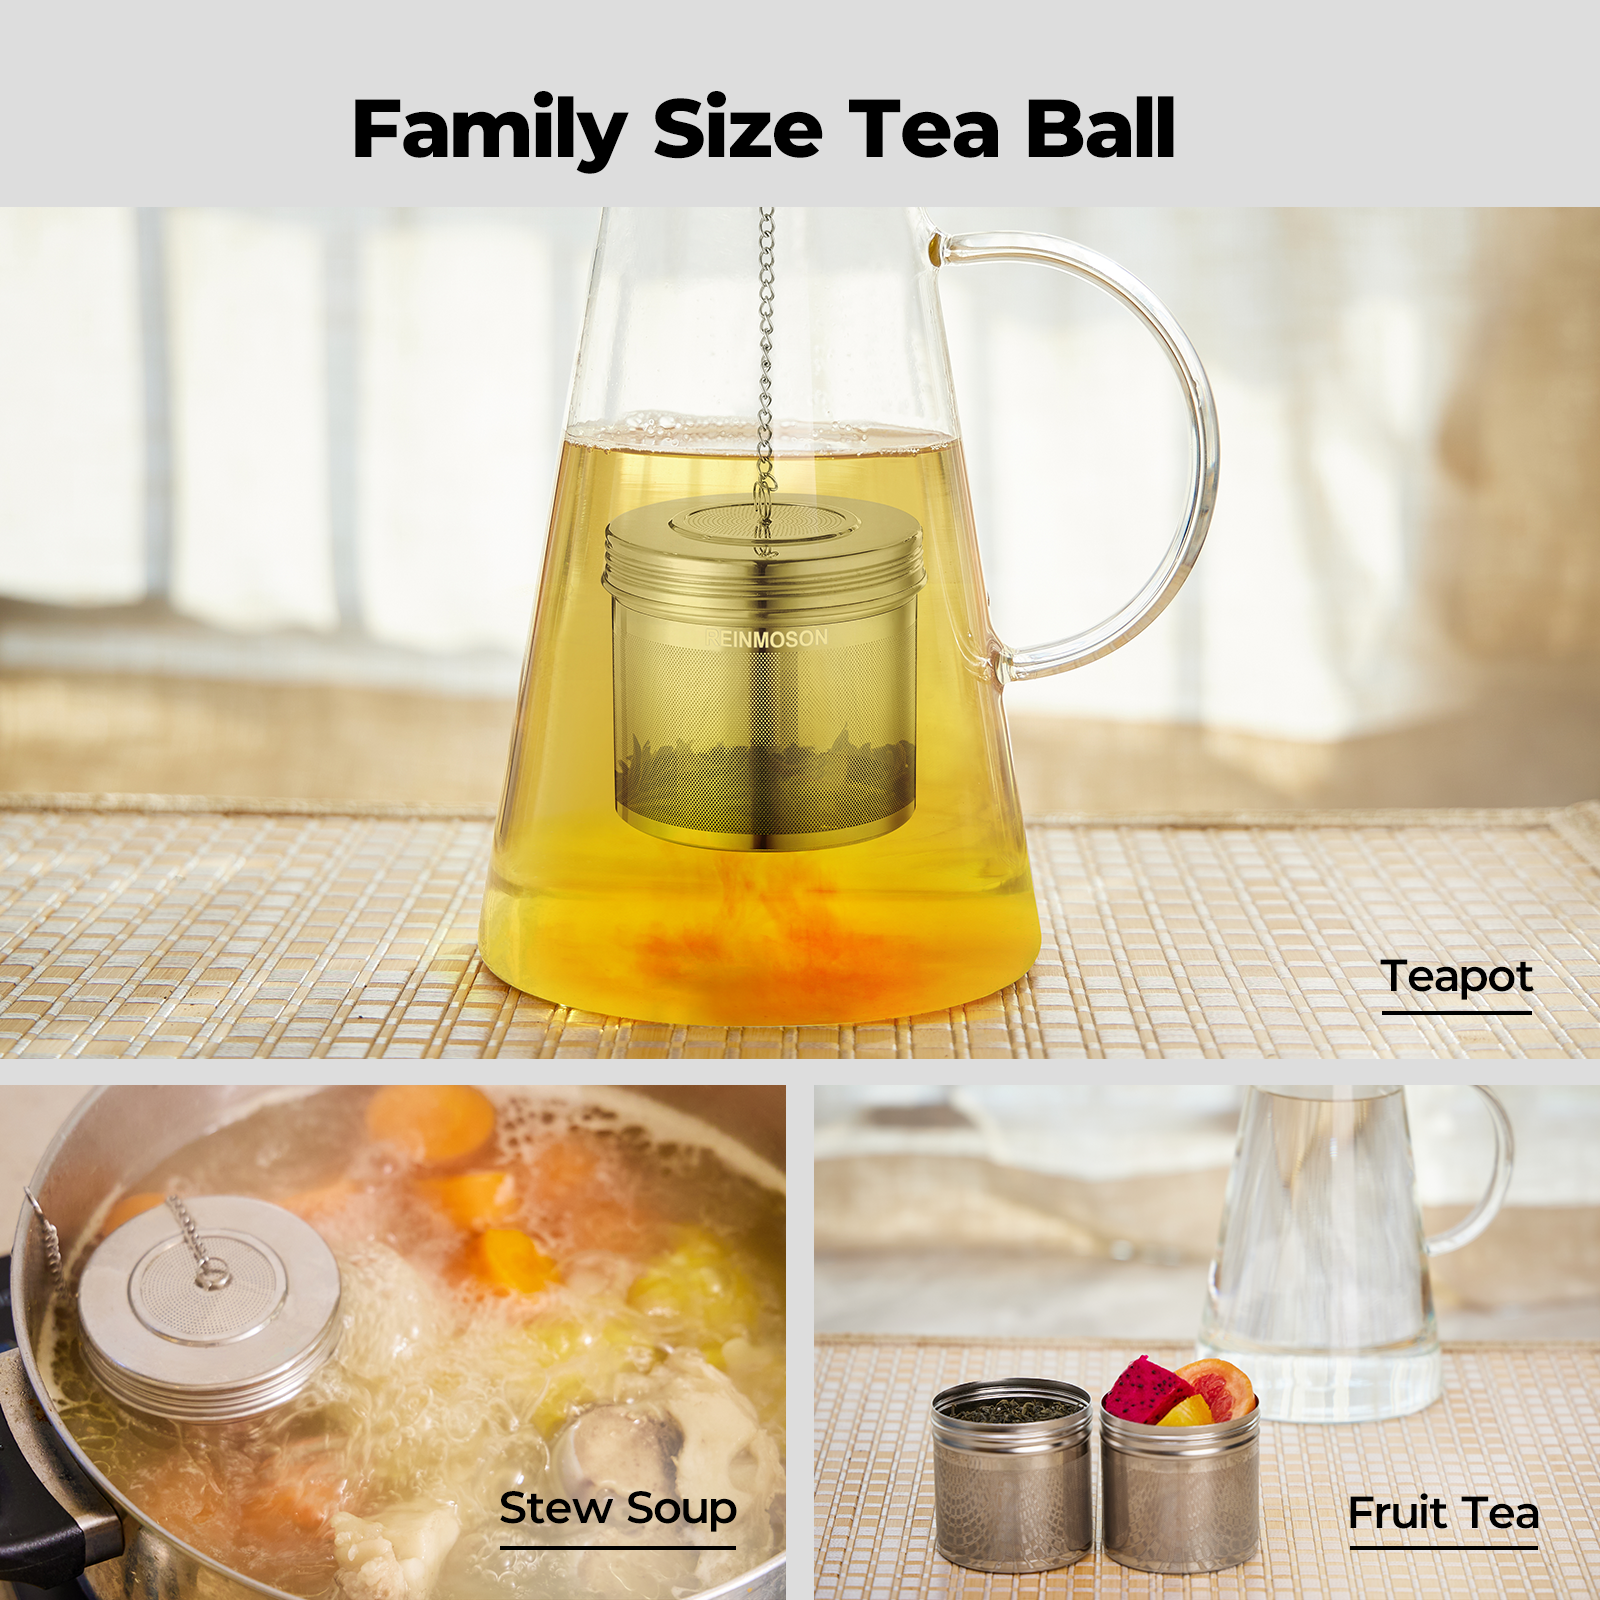 House Again 2 Pack Tea Infuser, Extra Fine Mesh Tea Infusers for Loose Tea,  18/8 Stainless Steel Tea Strainer with Extended Chain Hook, Tea Steeper